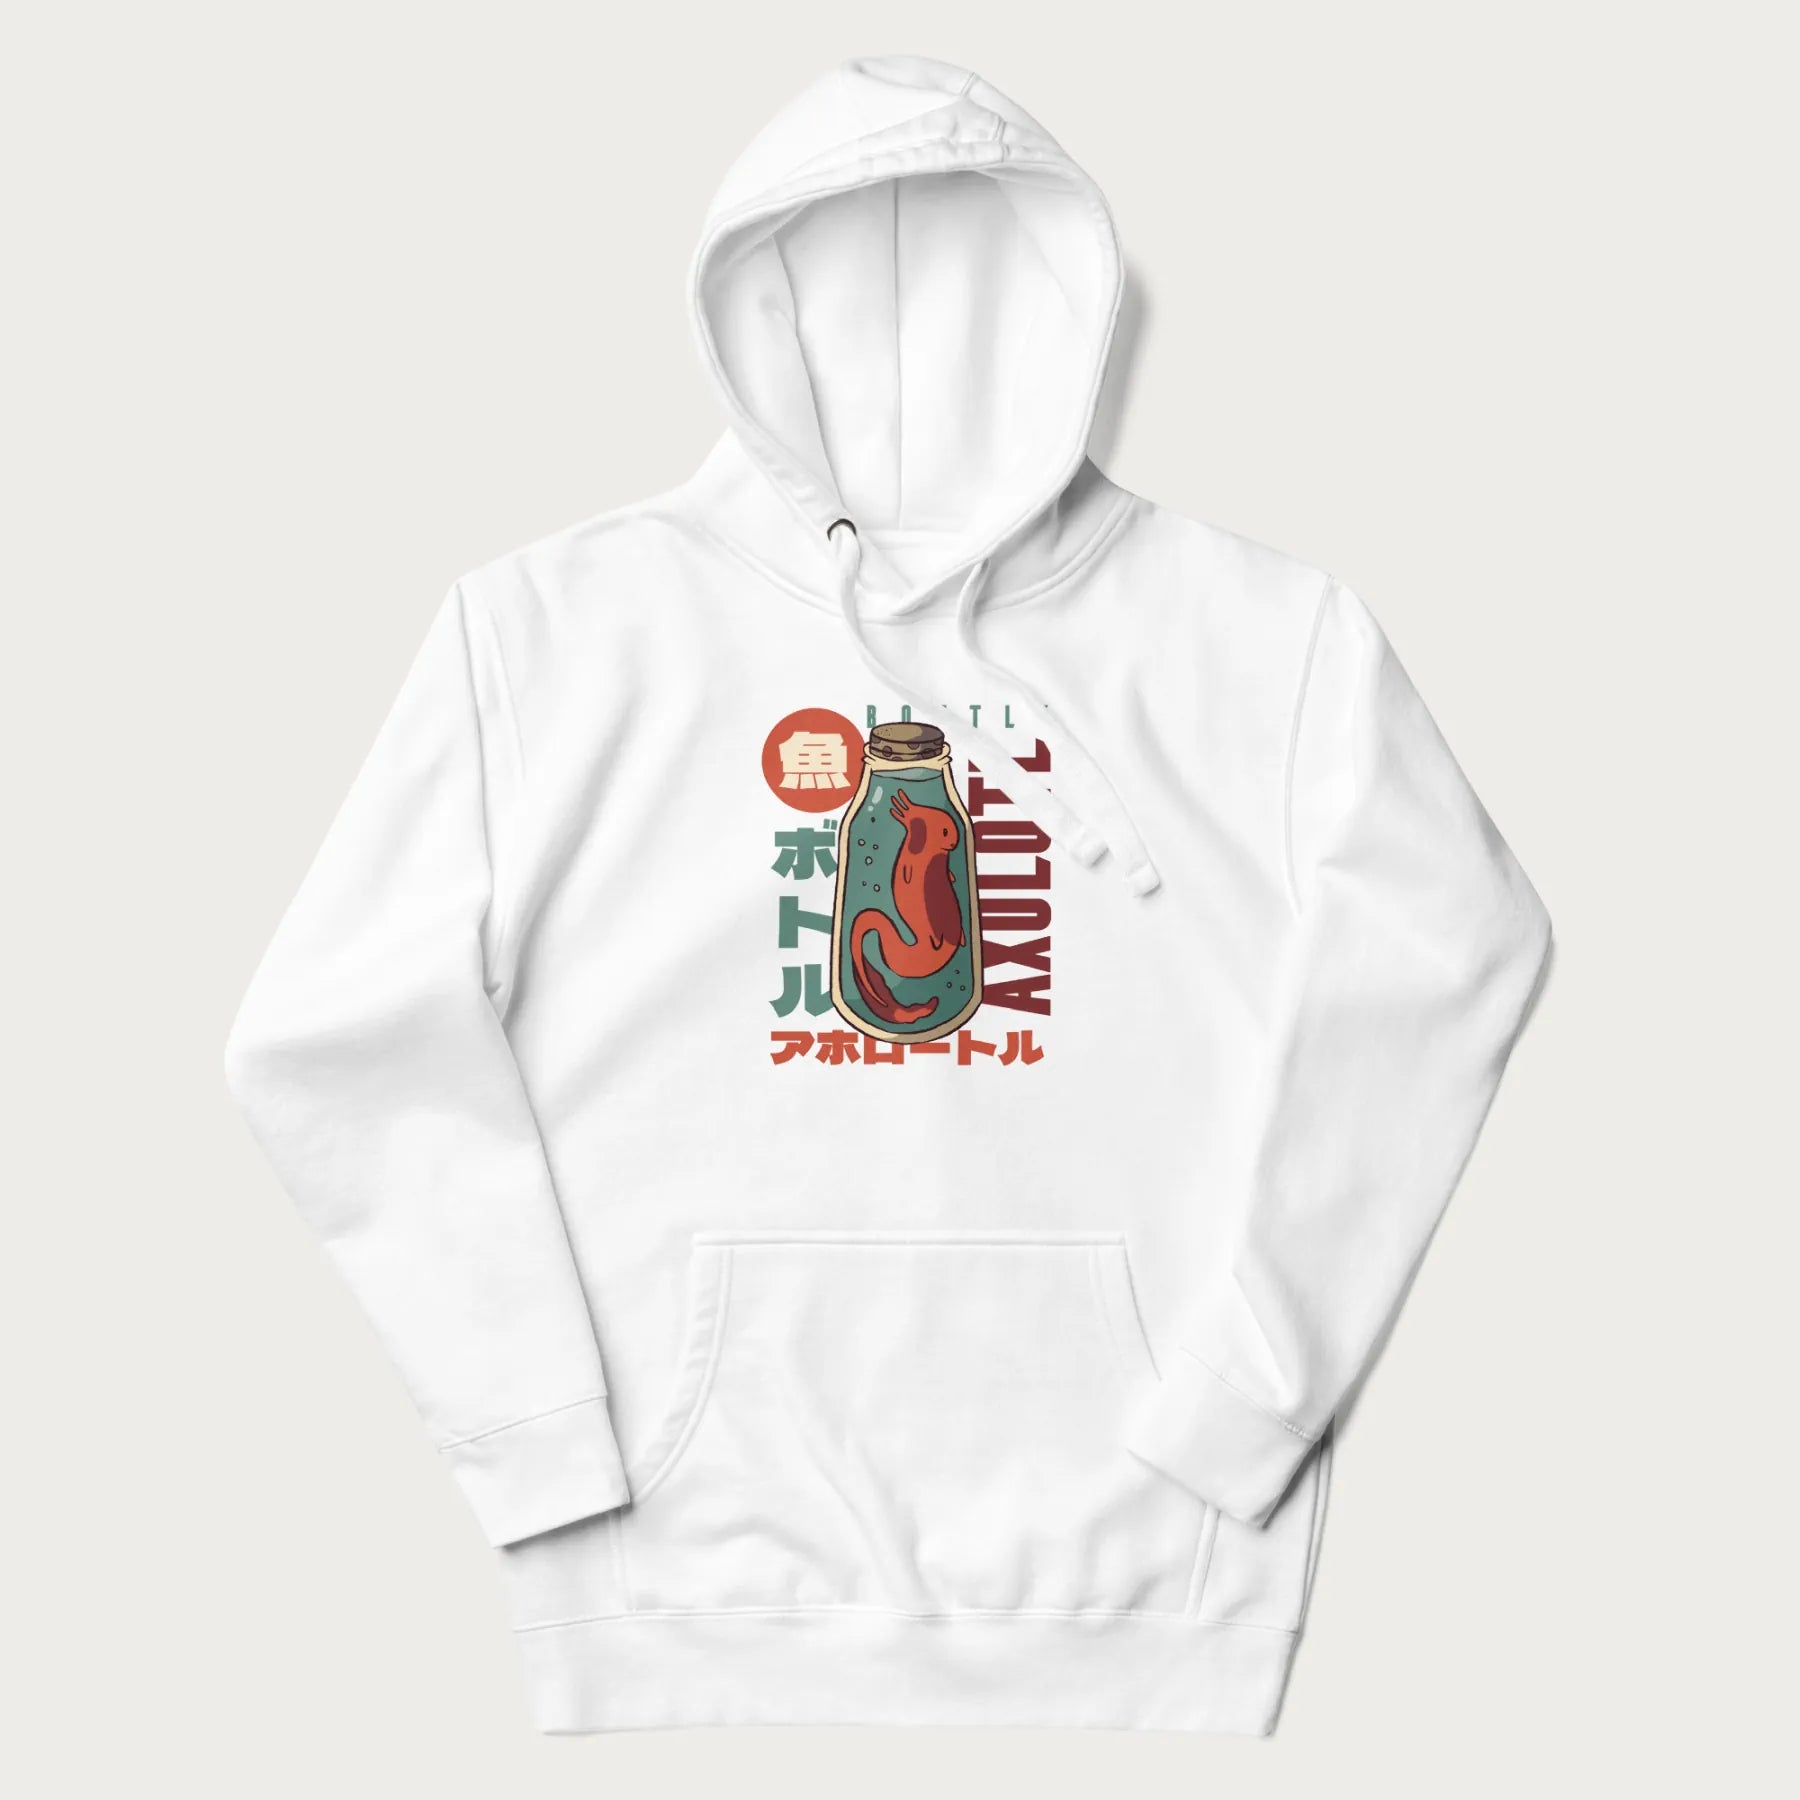 White hoodie with Japanese graphic of a red axolotl in a bottle with Japanese text 'ボトル' (Bottle) and 'アホロートル' (Axolotl).